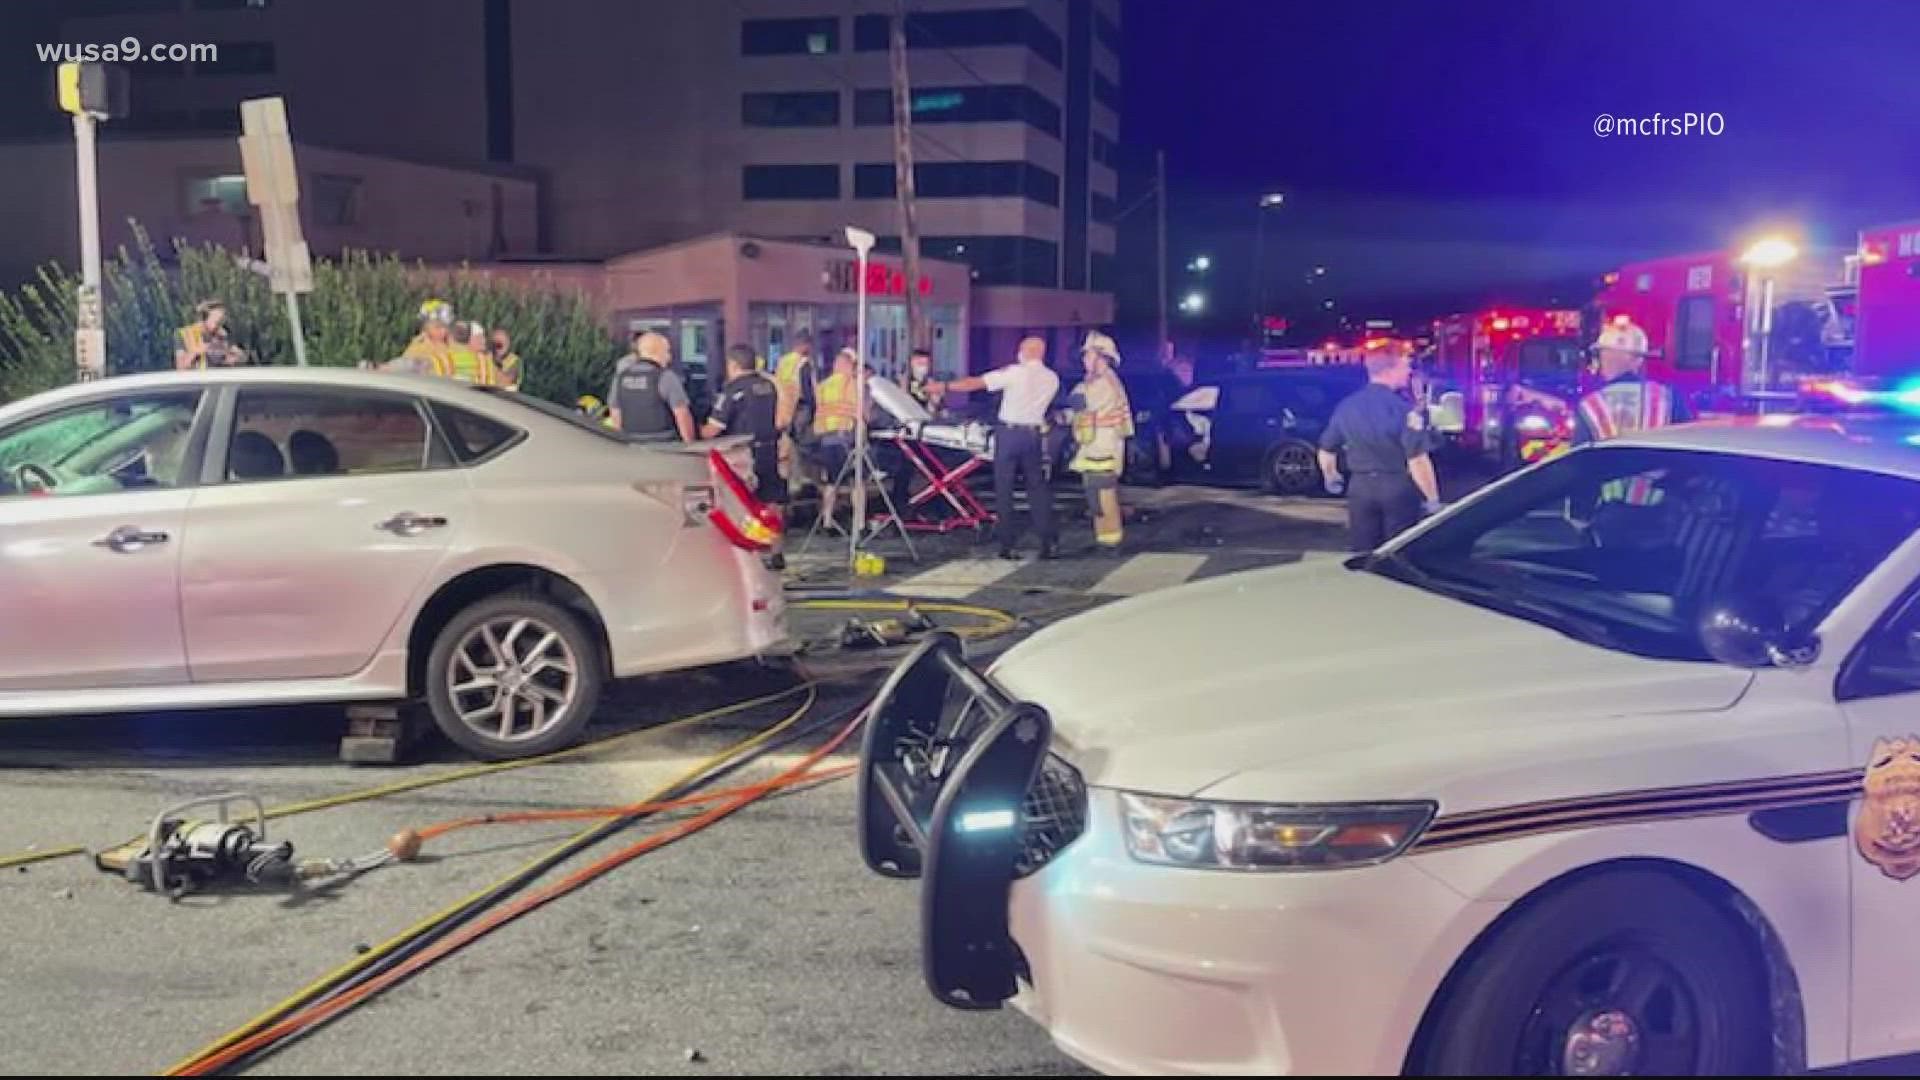 The crash involved five cars and resulted in one person being ejected from a vehicle and another was trapped, officials say.